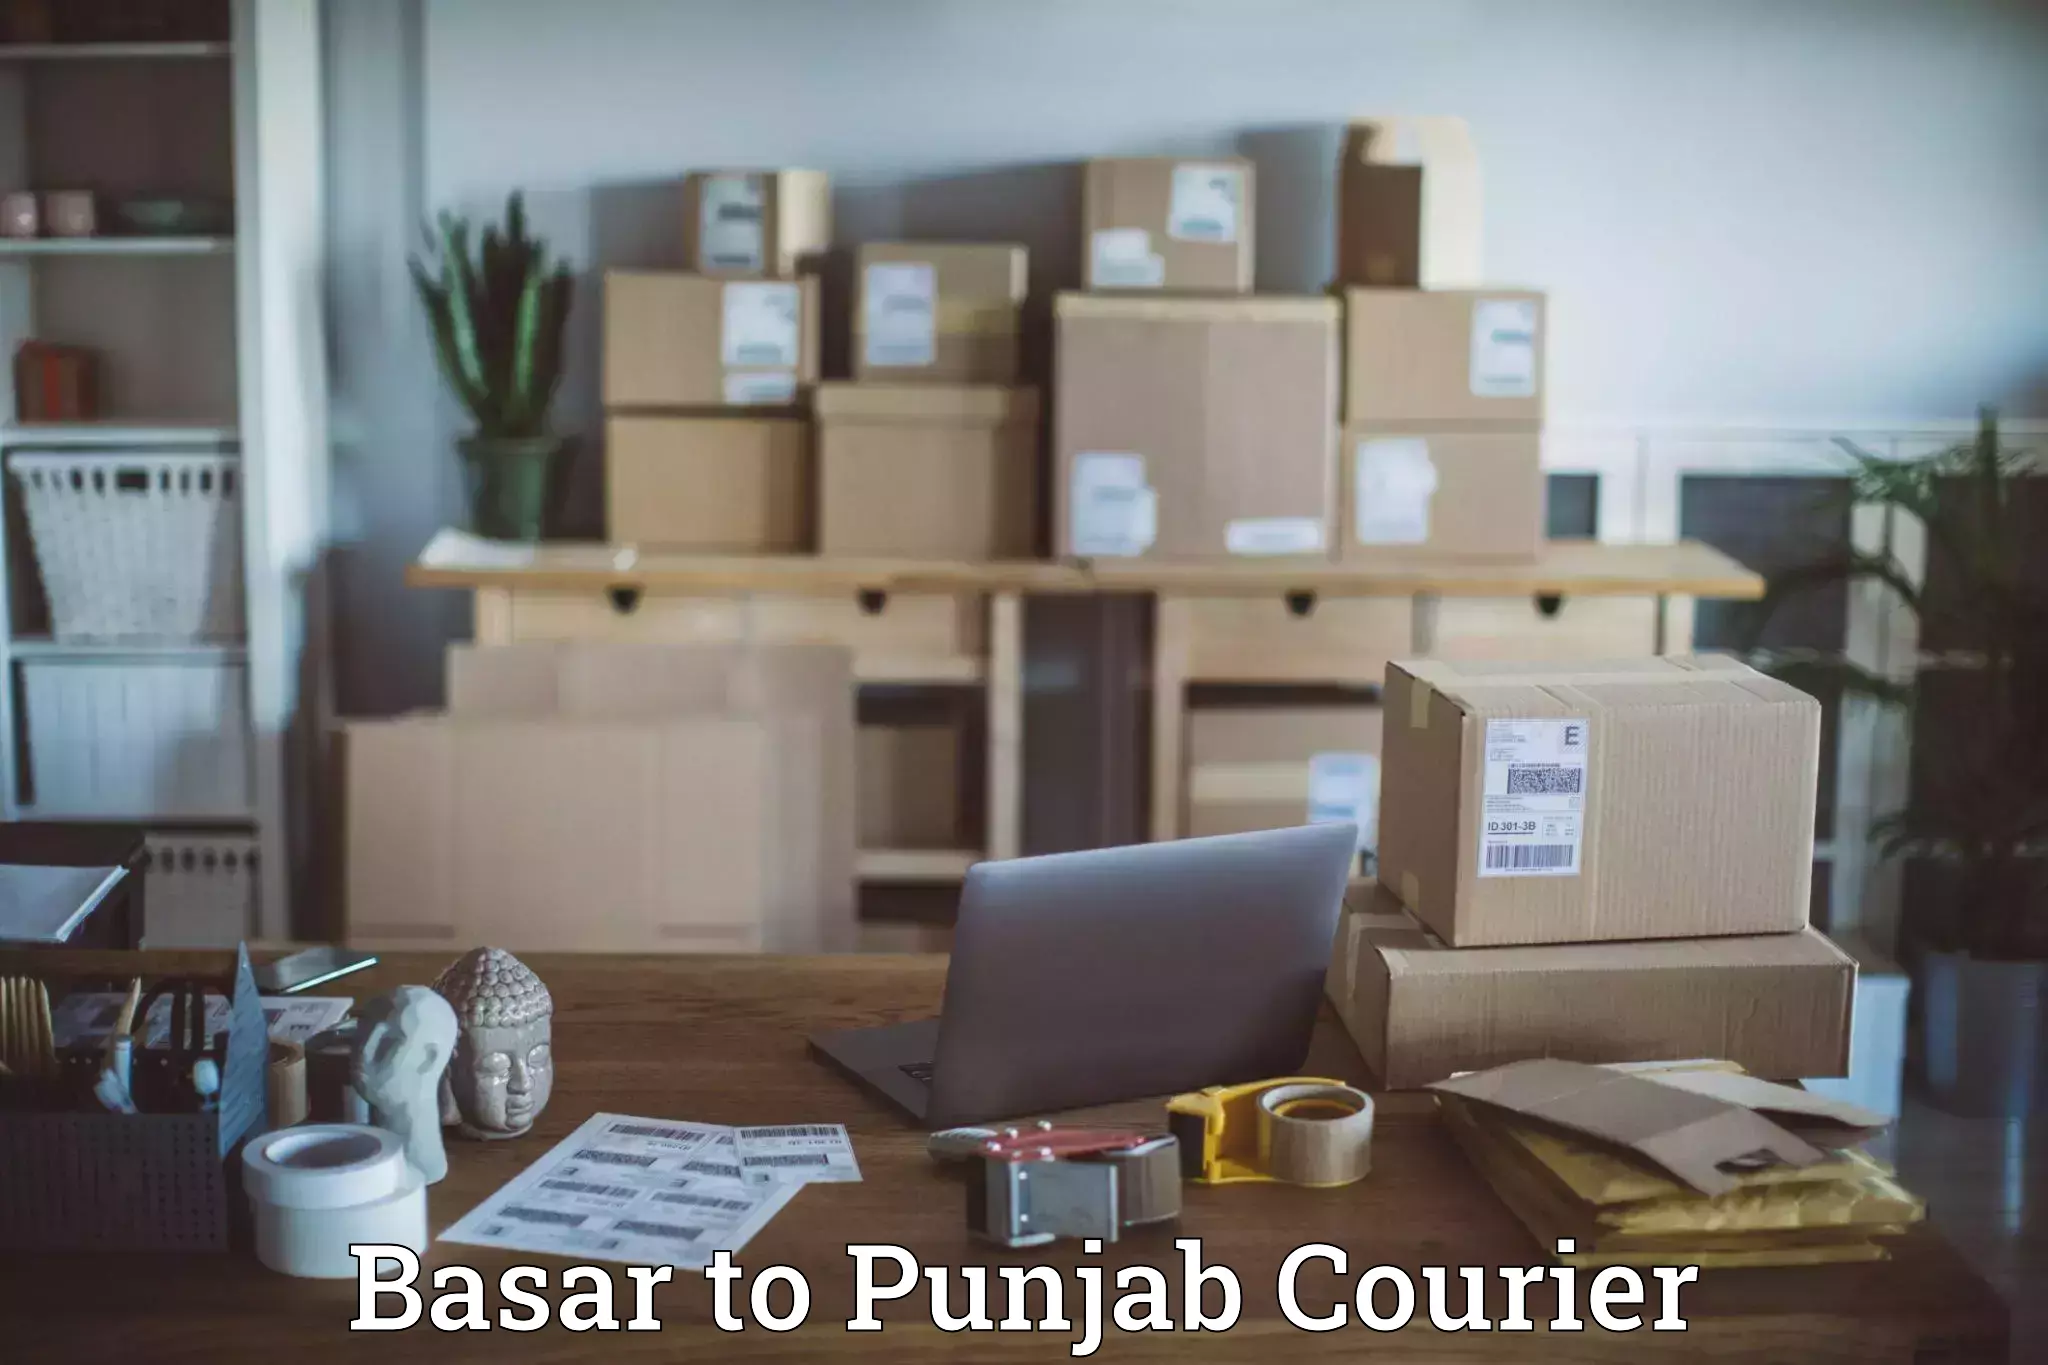 Delivery service partnership Basar to Beas